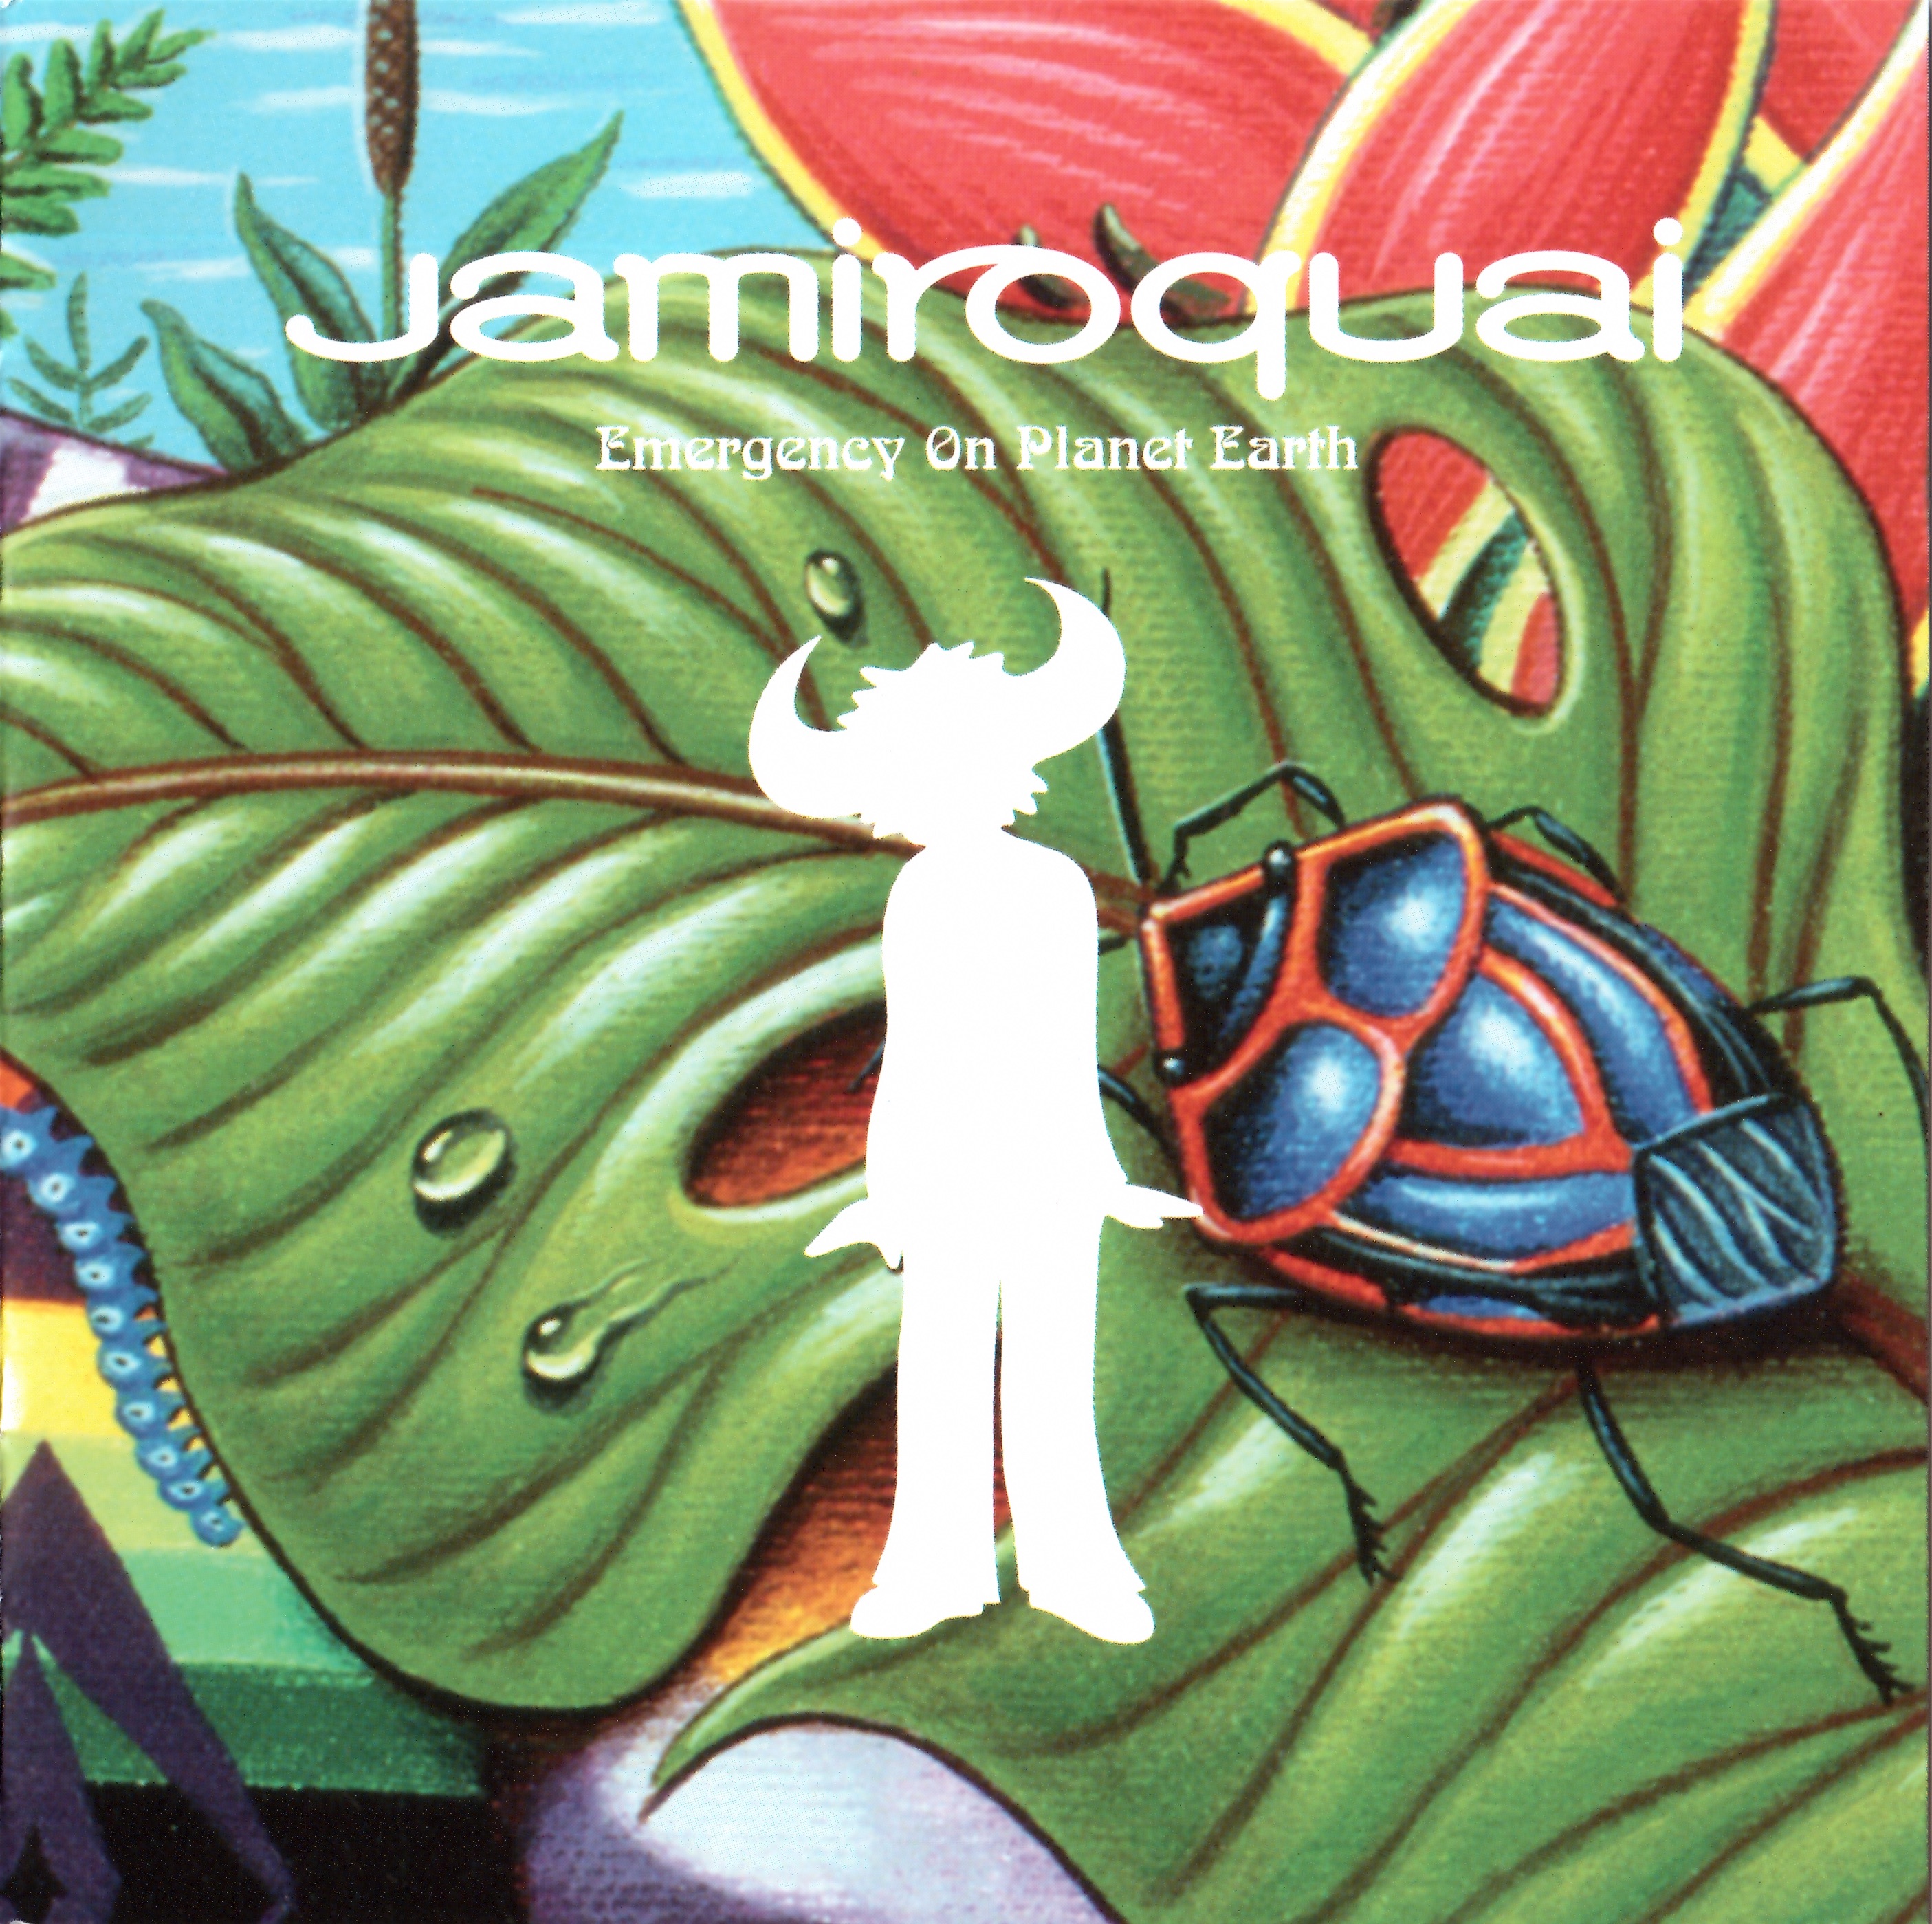 Release “Emergency on Planet Earth” by Jamiroquai - Cover Art